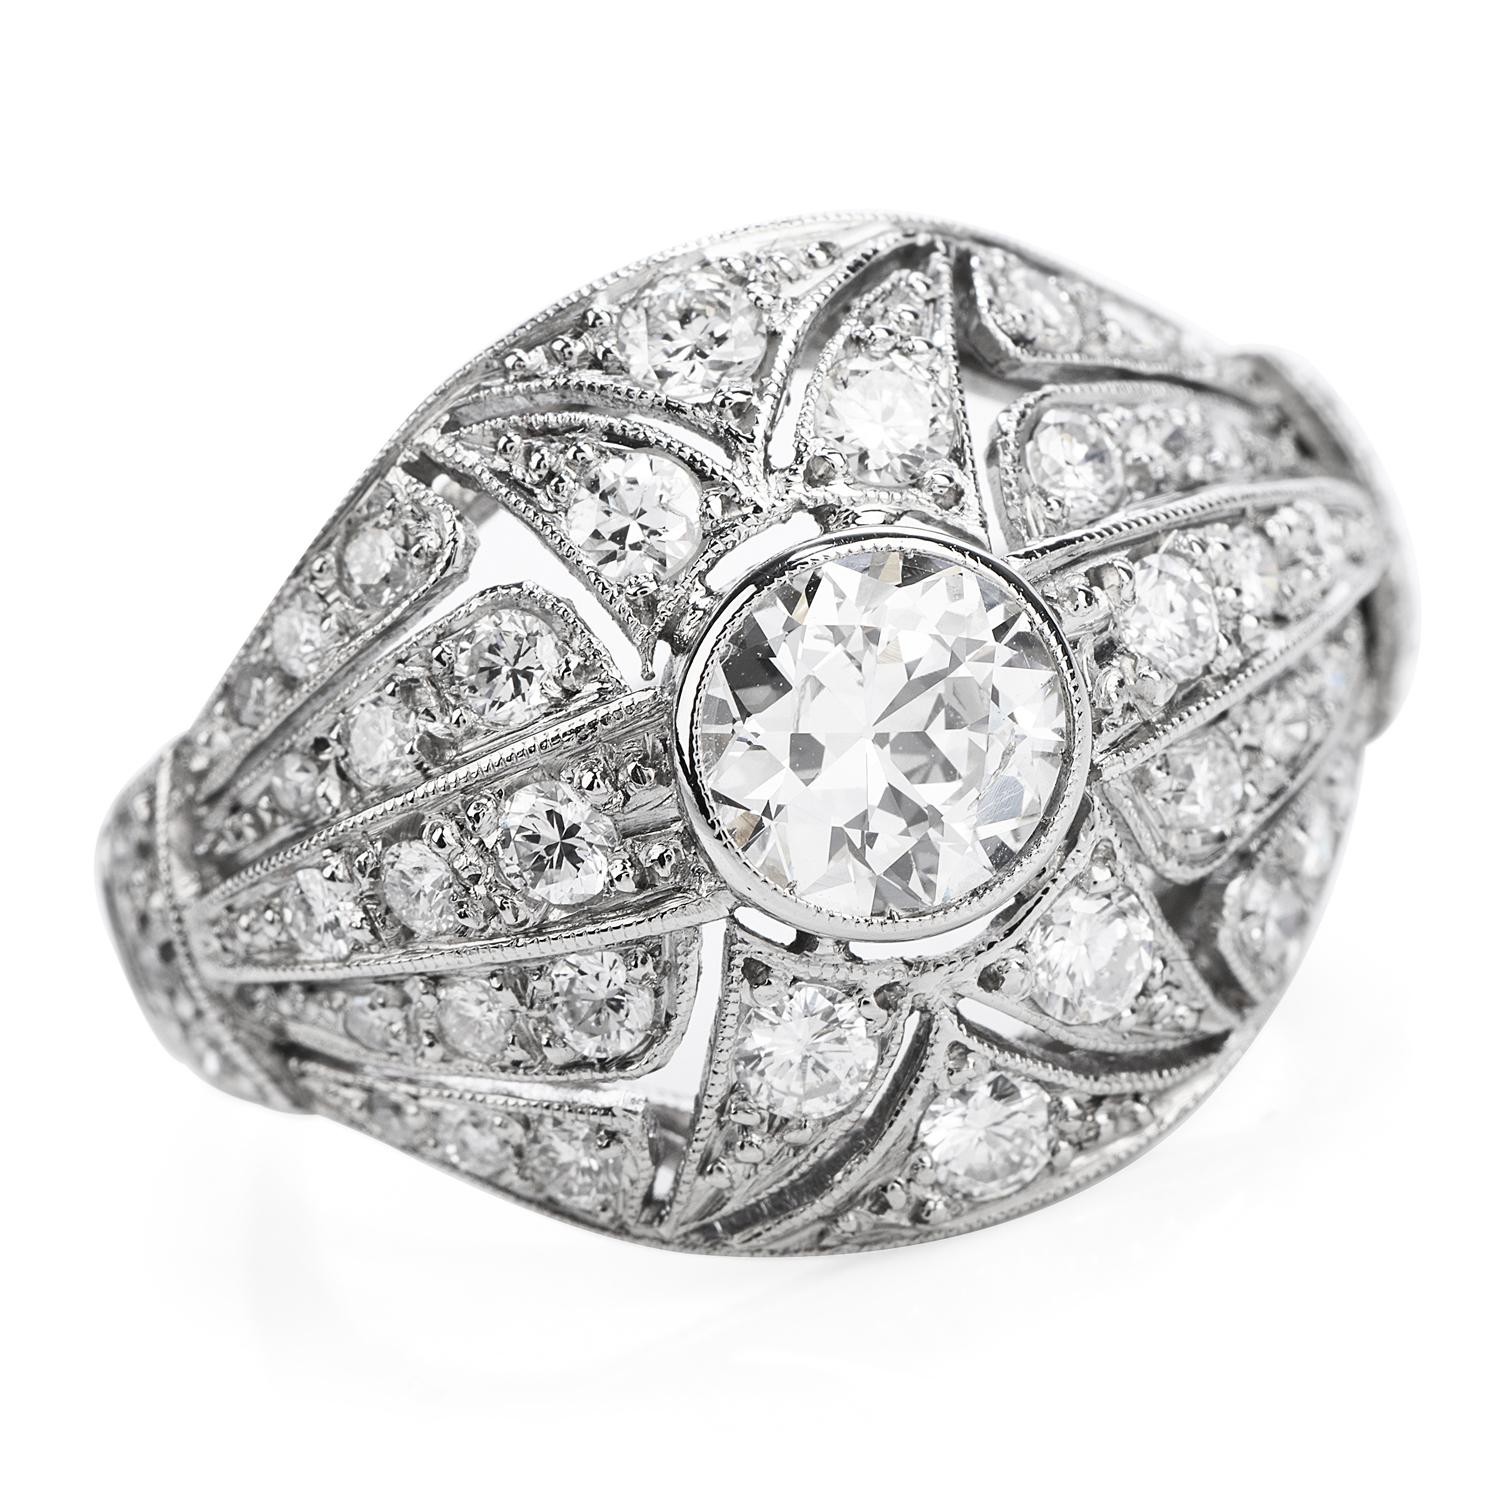 Take a step back in time with this Antique art deco Diamond Engagement ring crafted in luxurious platinum.
Intricate cut out and filagree patterns run throughout the top of this ring featuring one round European cut Diamond in the center weighing